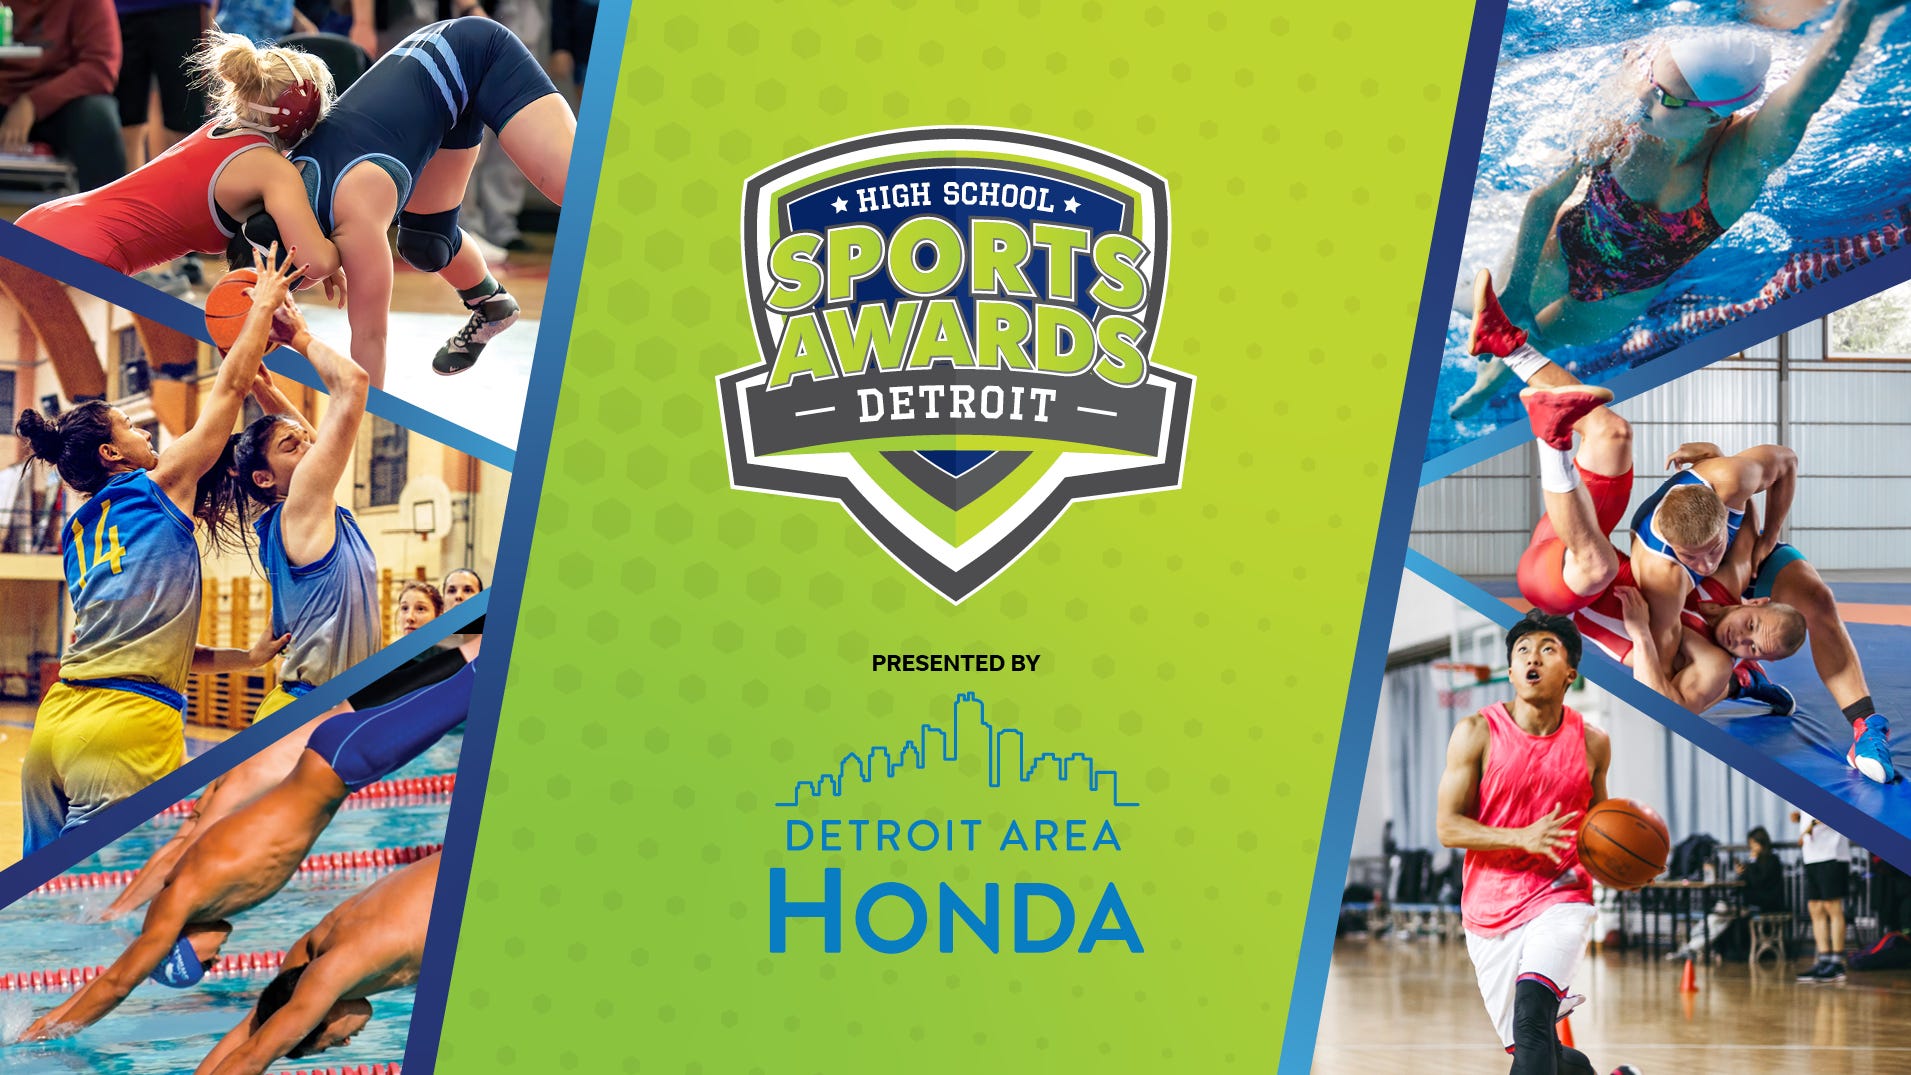 Meet the gymnastics nominees for the Detroit High School Sports Awards